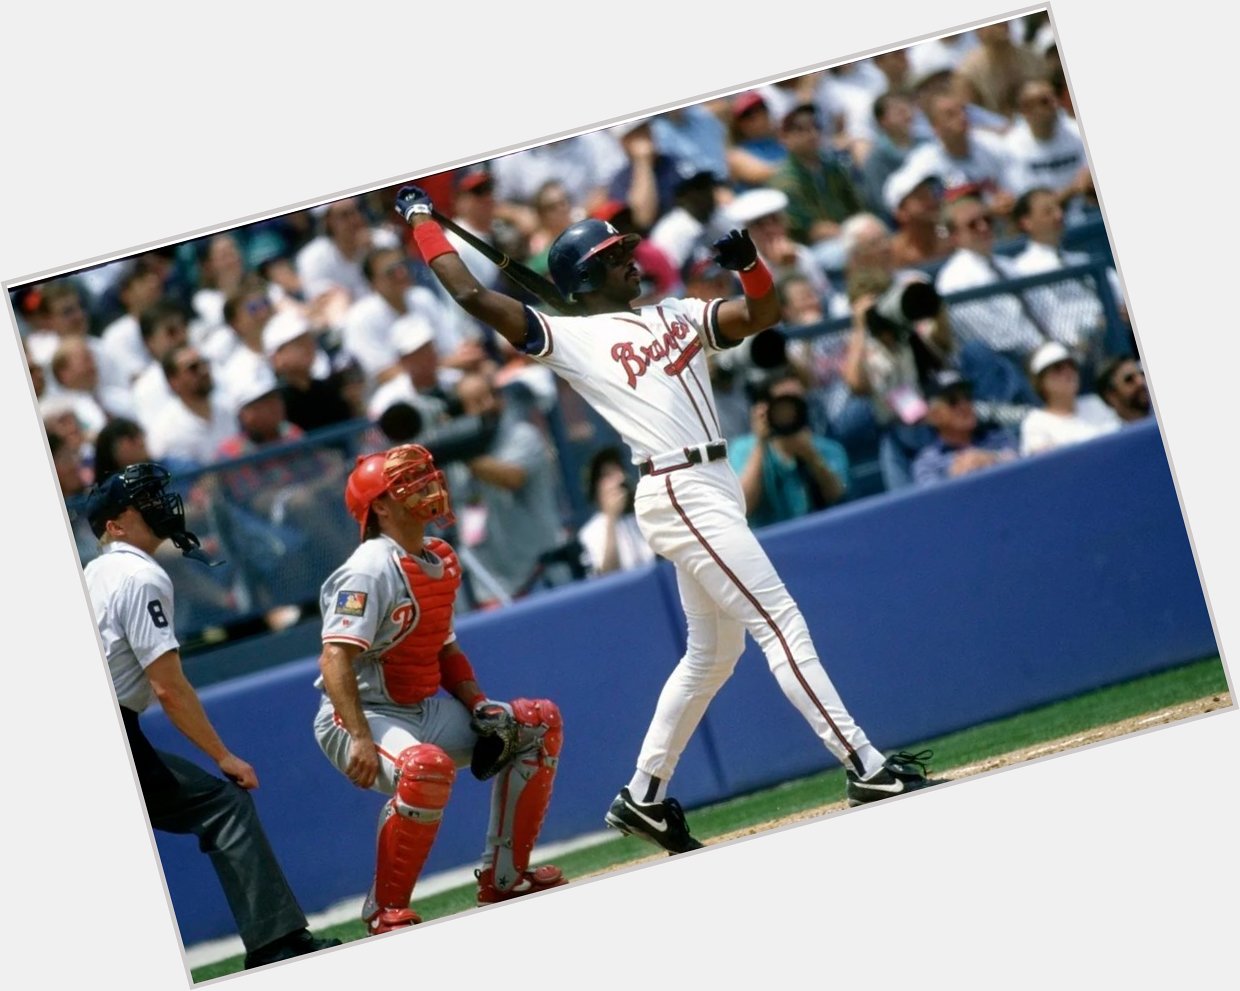 Happy Fred McGriff\s Birthday to all who celebrate. 